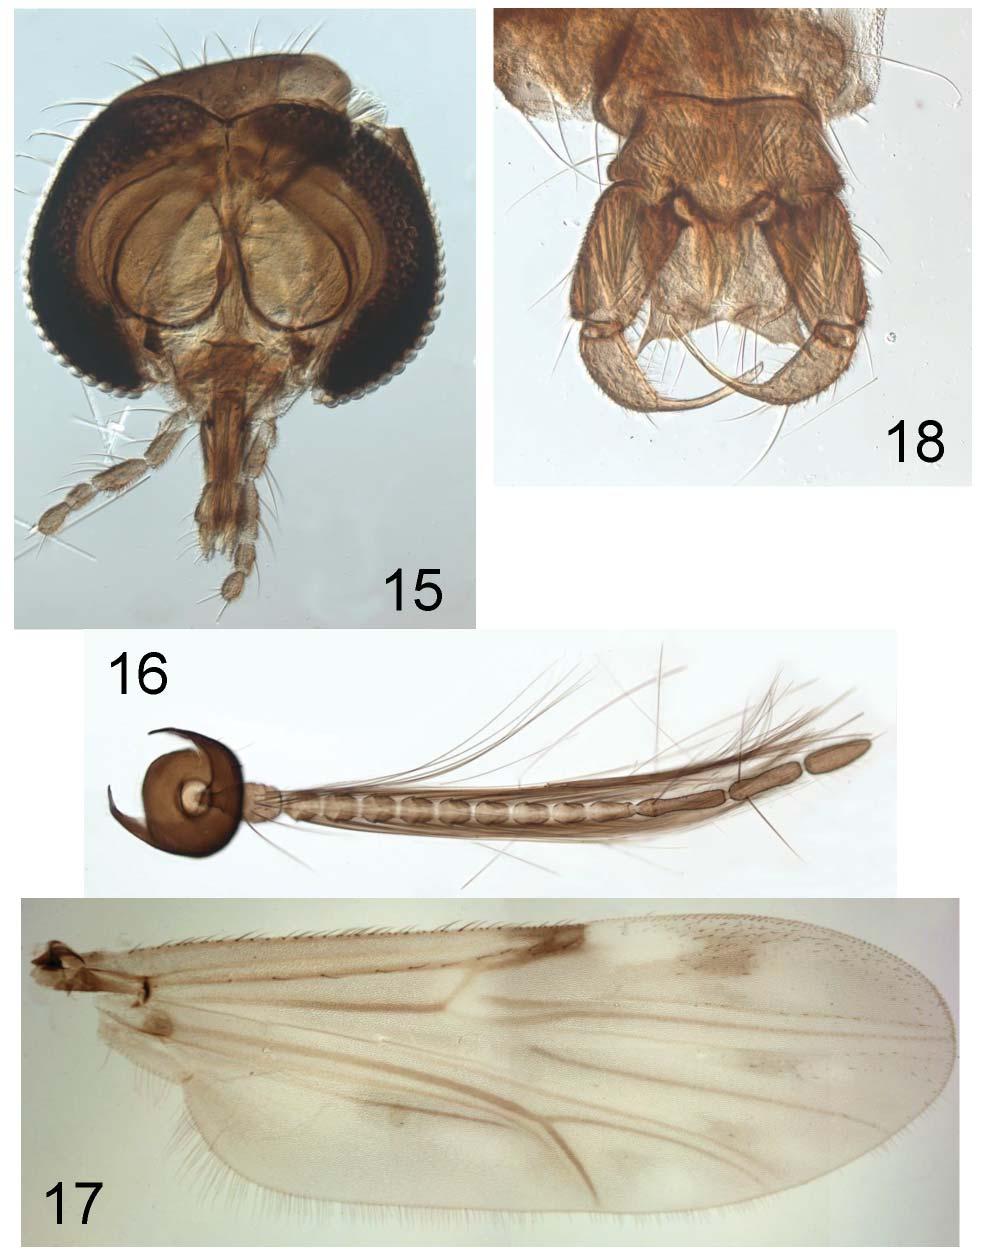 A REVISION OF THE BITING MIDGES INSECTA MUNDI 0441, August 2015 19 Figures 15 18.